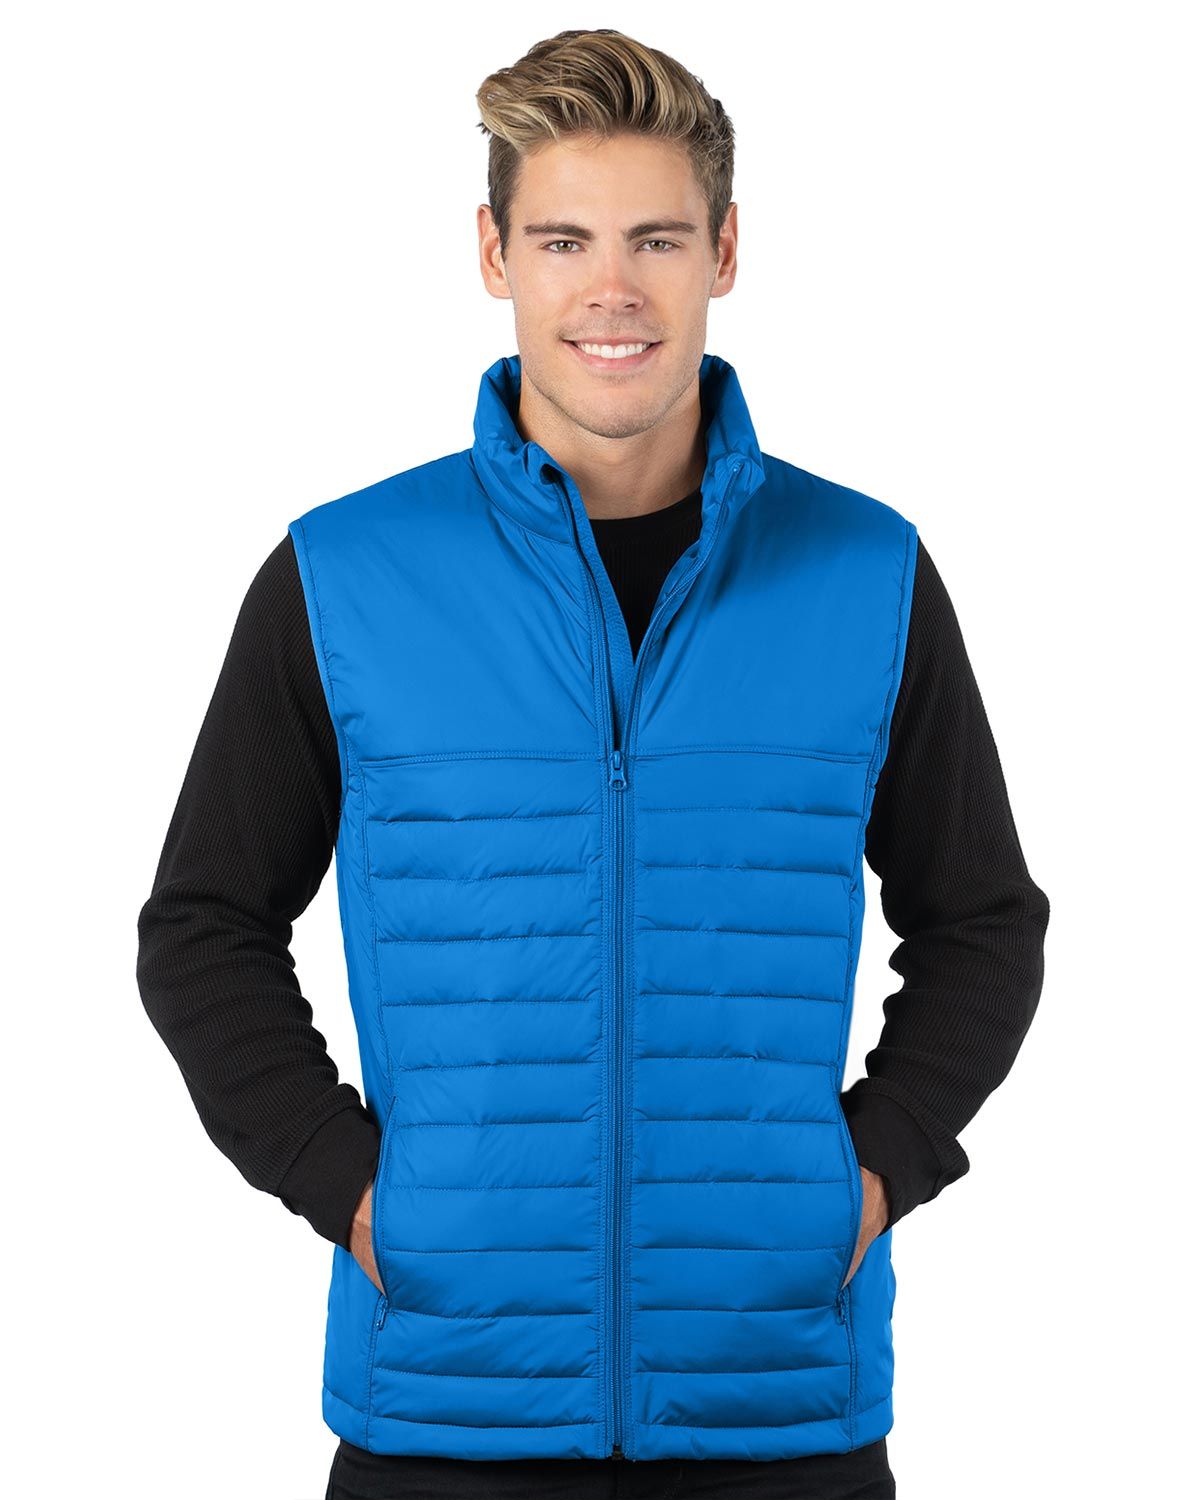 Tri-Mountain J8258 Men’s Quilted Puffer Vest